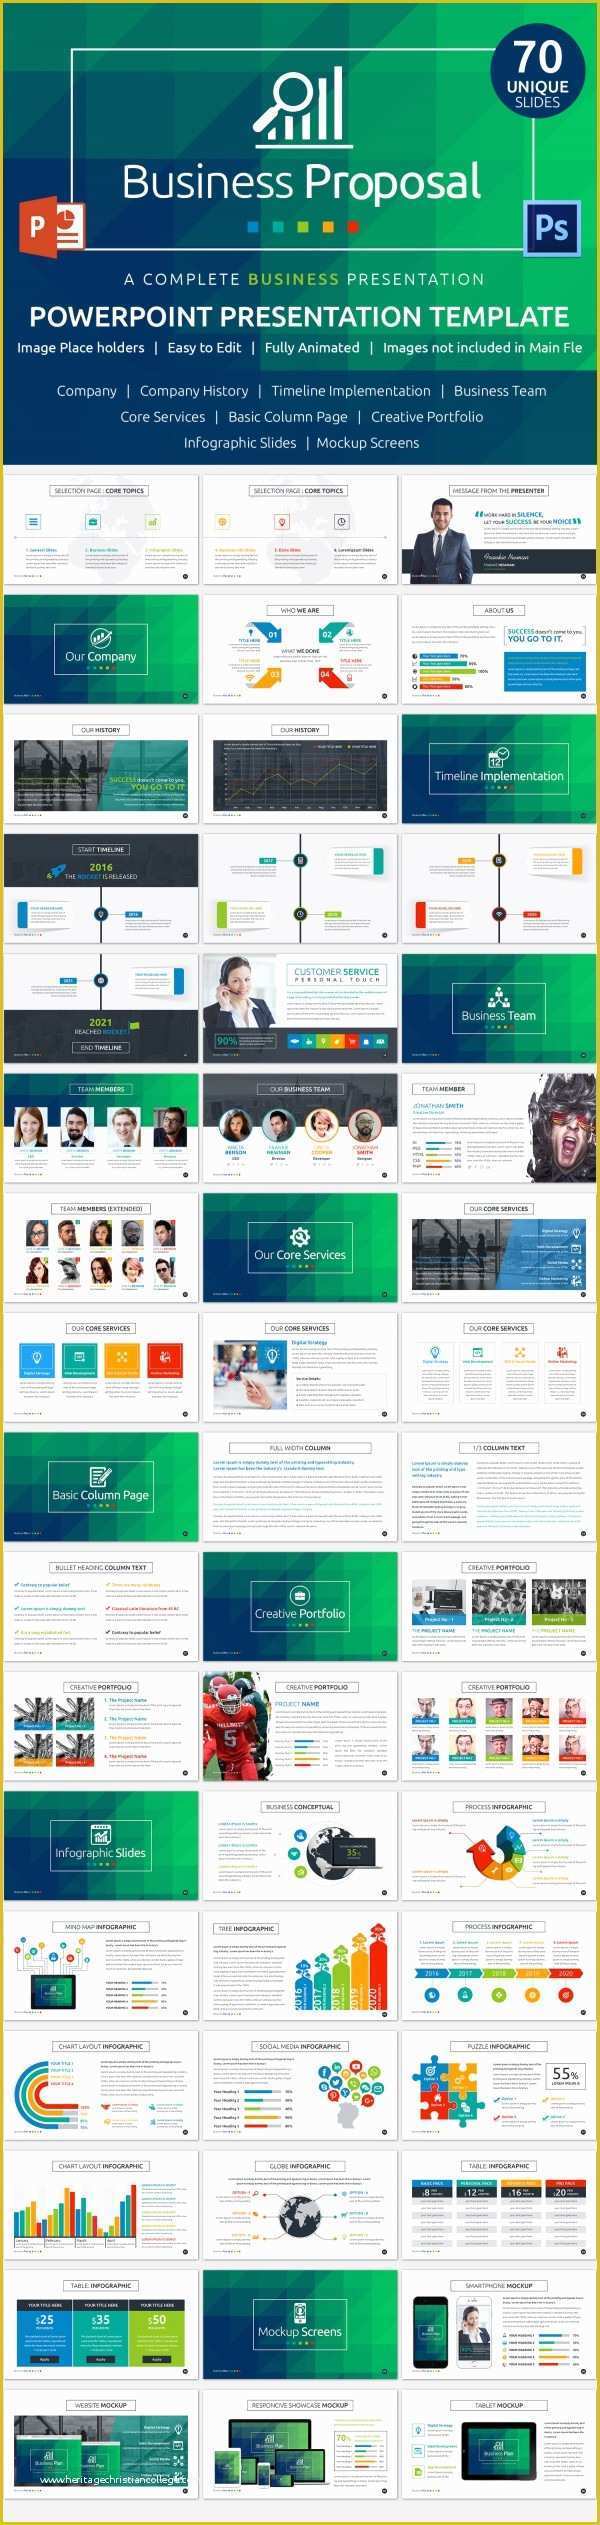 Free Business Proposal Ppt Template Of 25 Powerpoint Templates with Animation